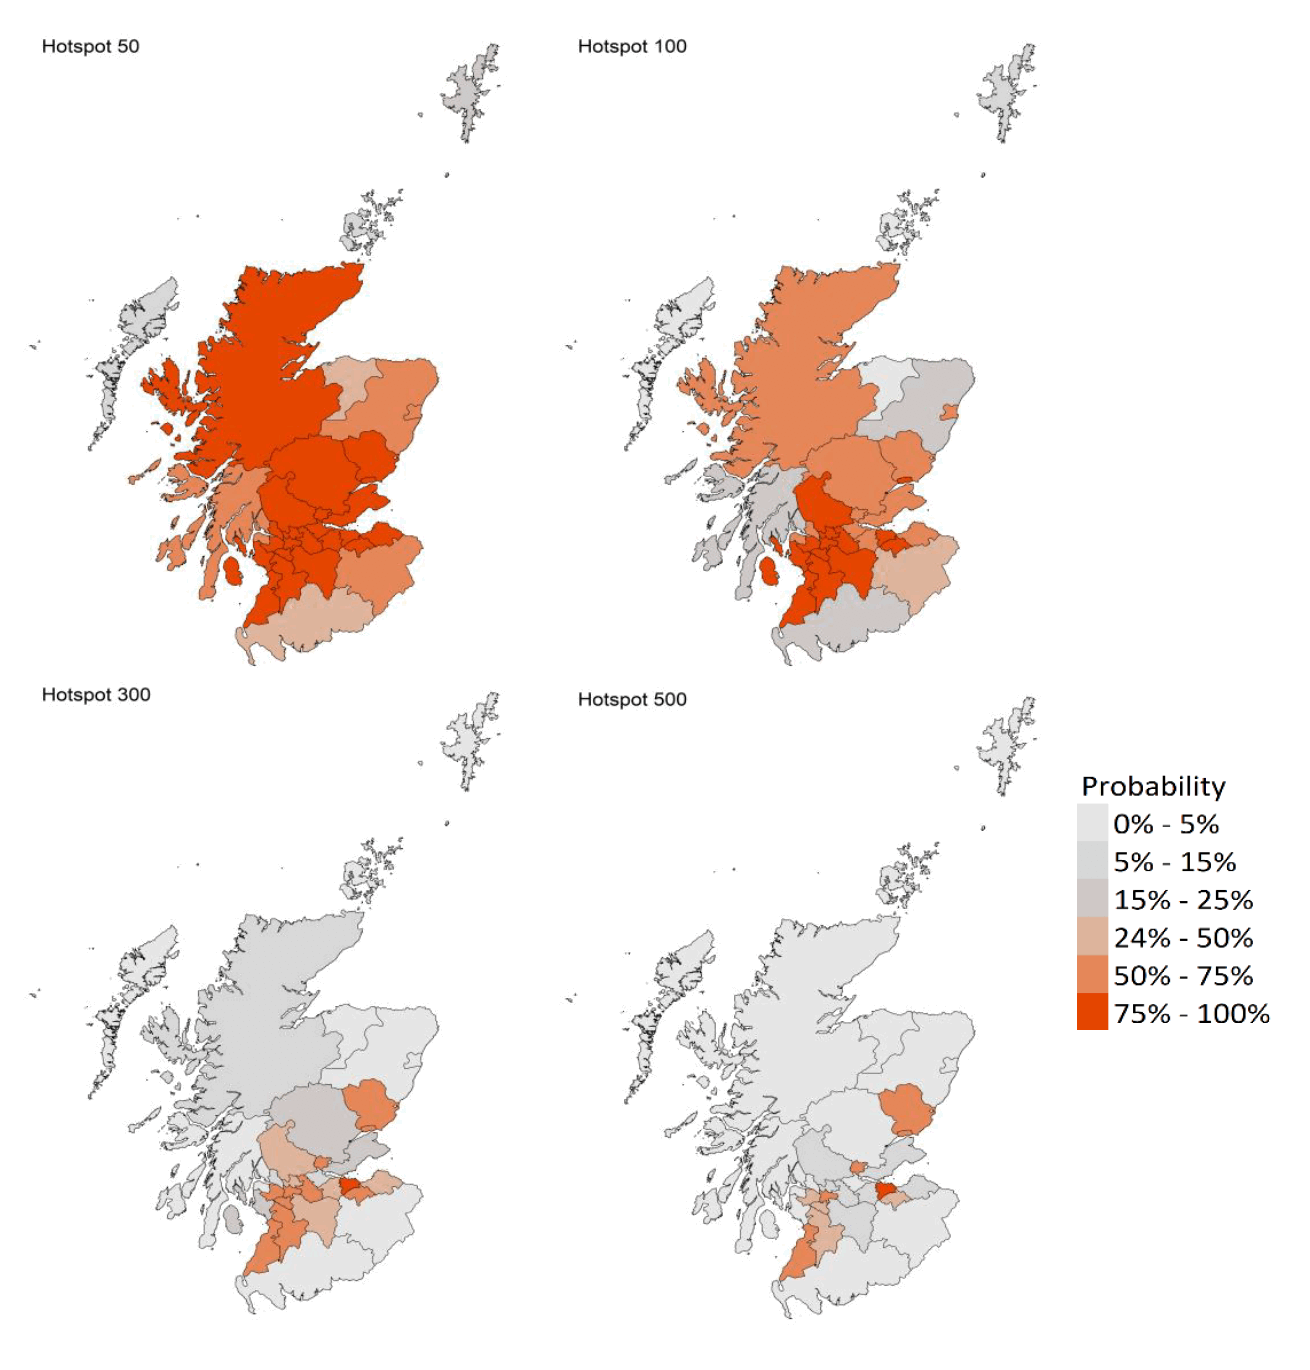 These four colour coded maps of Scotland show the probability of Local Authorities having more than 50, more than 100, more than 300 and more than 500 cases per 100,000 population. The colours range from light grey for a 0 to 5 percent probability, through dark grey and light orange, to dark orange for a 75 to 100 percent probability. 
These maps show that there are 22 local authorities that have at least a 75% probability of exceeding 50 cases per 100,000 population. Of those, 13 local authorities have at least a 75% probability of exceeding 100 cases (Dundee, East Ayrshire, East Dunbartonshire, East Renfrewshire, Edinburgh, Glasgow, Midlothian, North Ayrshire, North Lanarkshire, Renfrewshire, South Ayrshire, South Lanarkshire and Stirling), and Edinburgh is the only local authority with at least a 75% probability of exceeding 500 cases in this period
